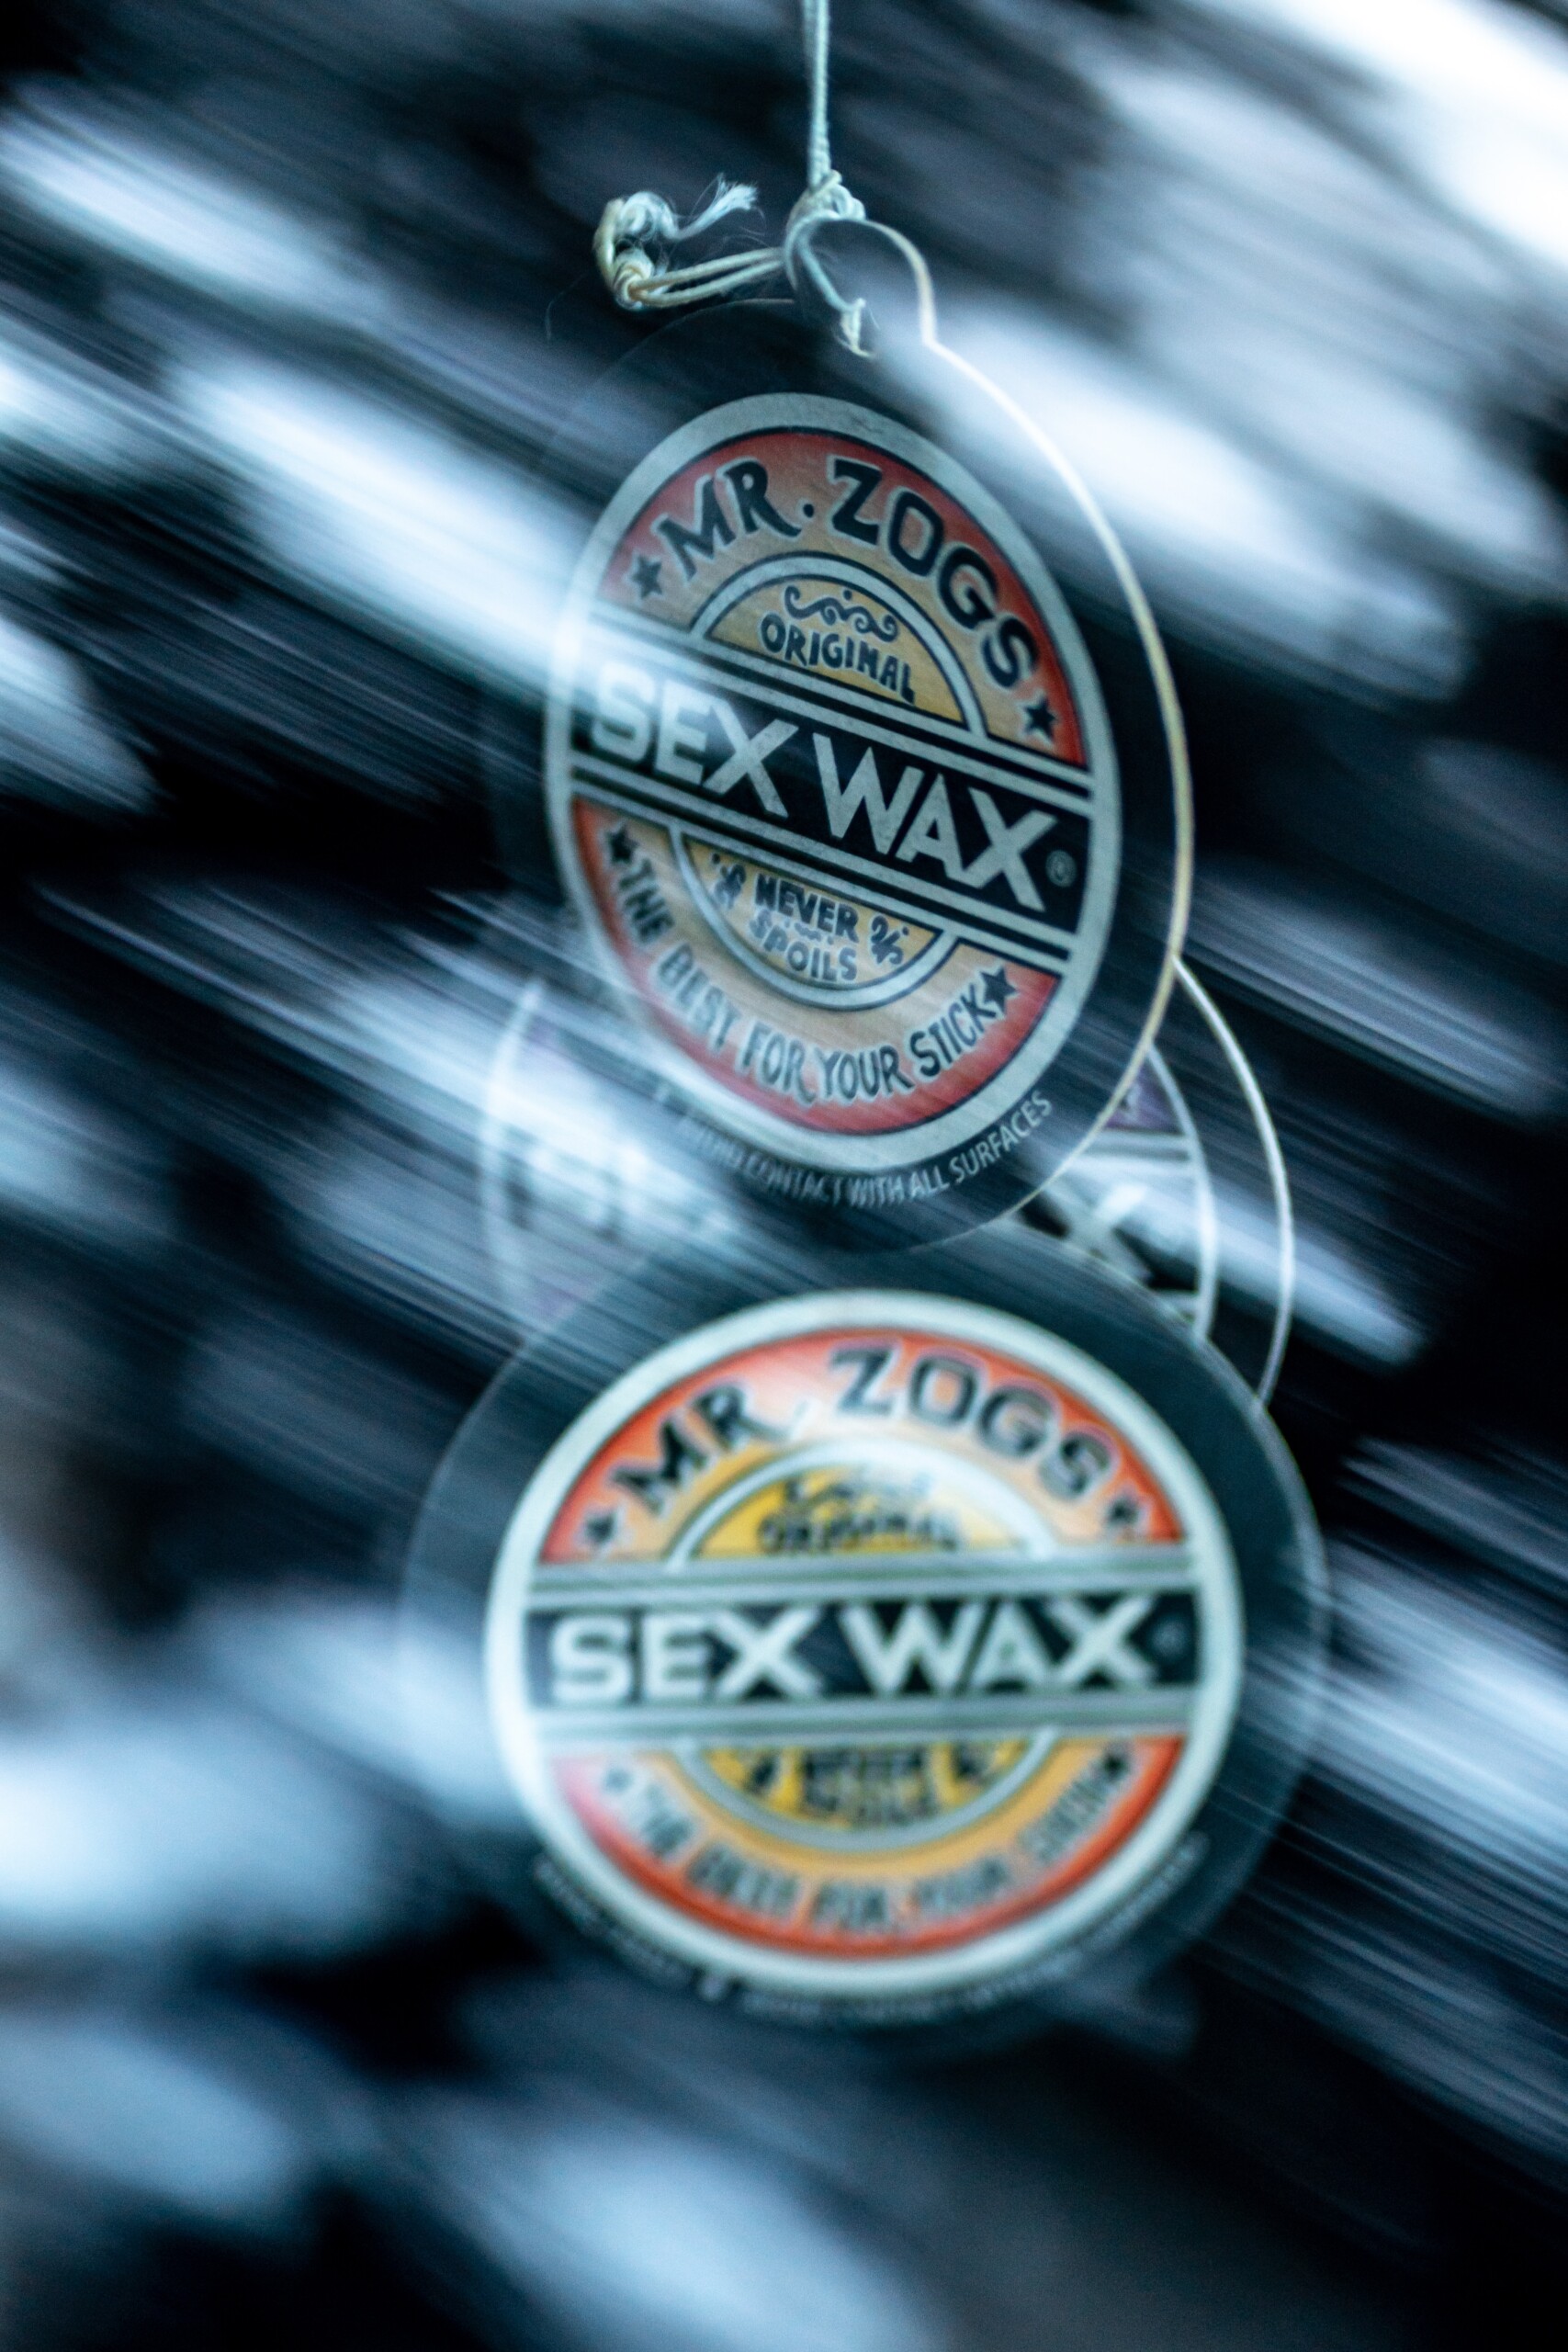 Everything you need to know about waxing a brand-new car - Surf N